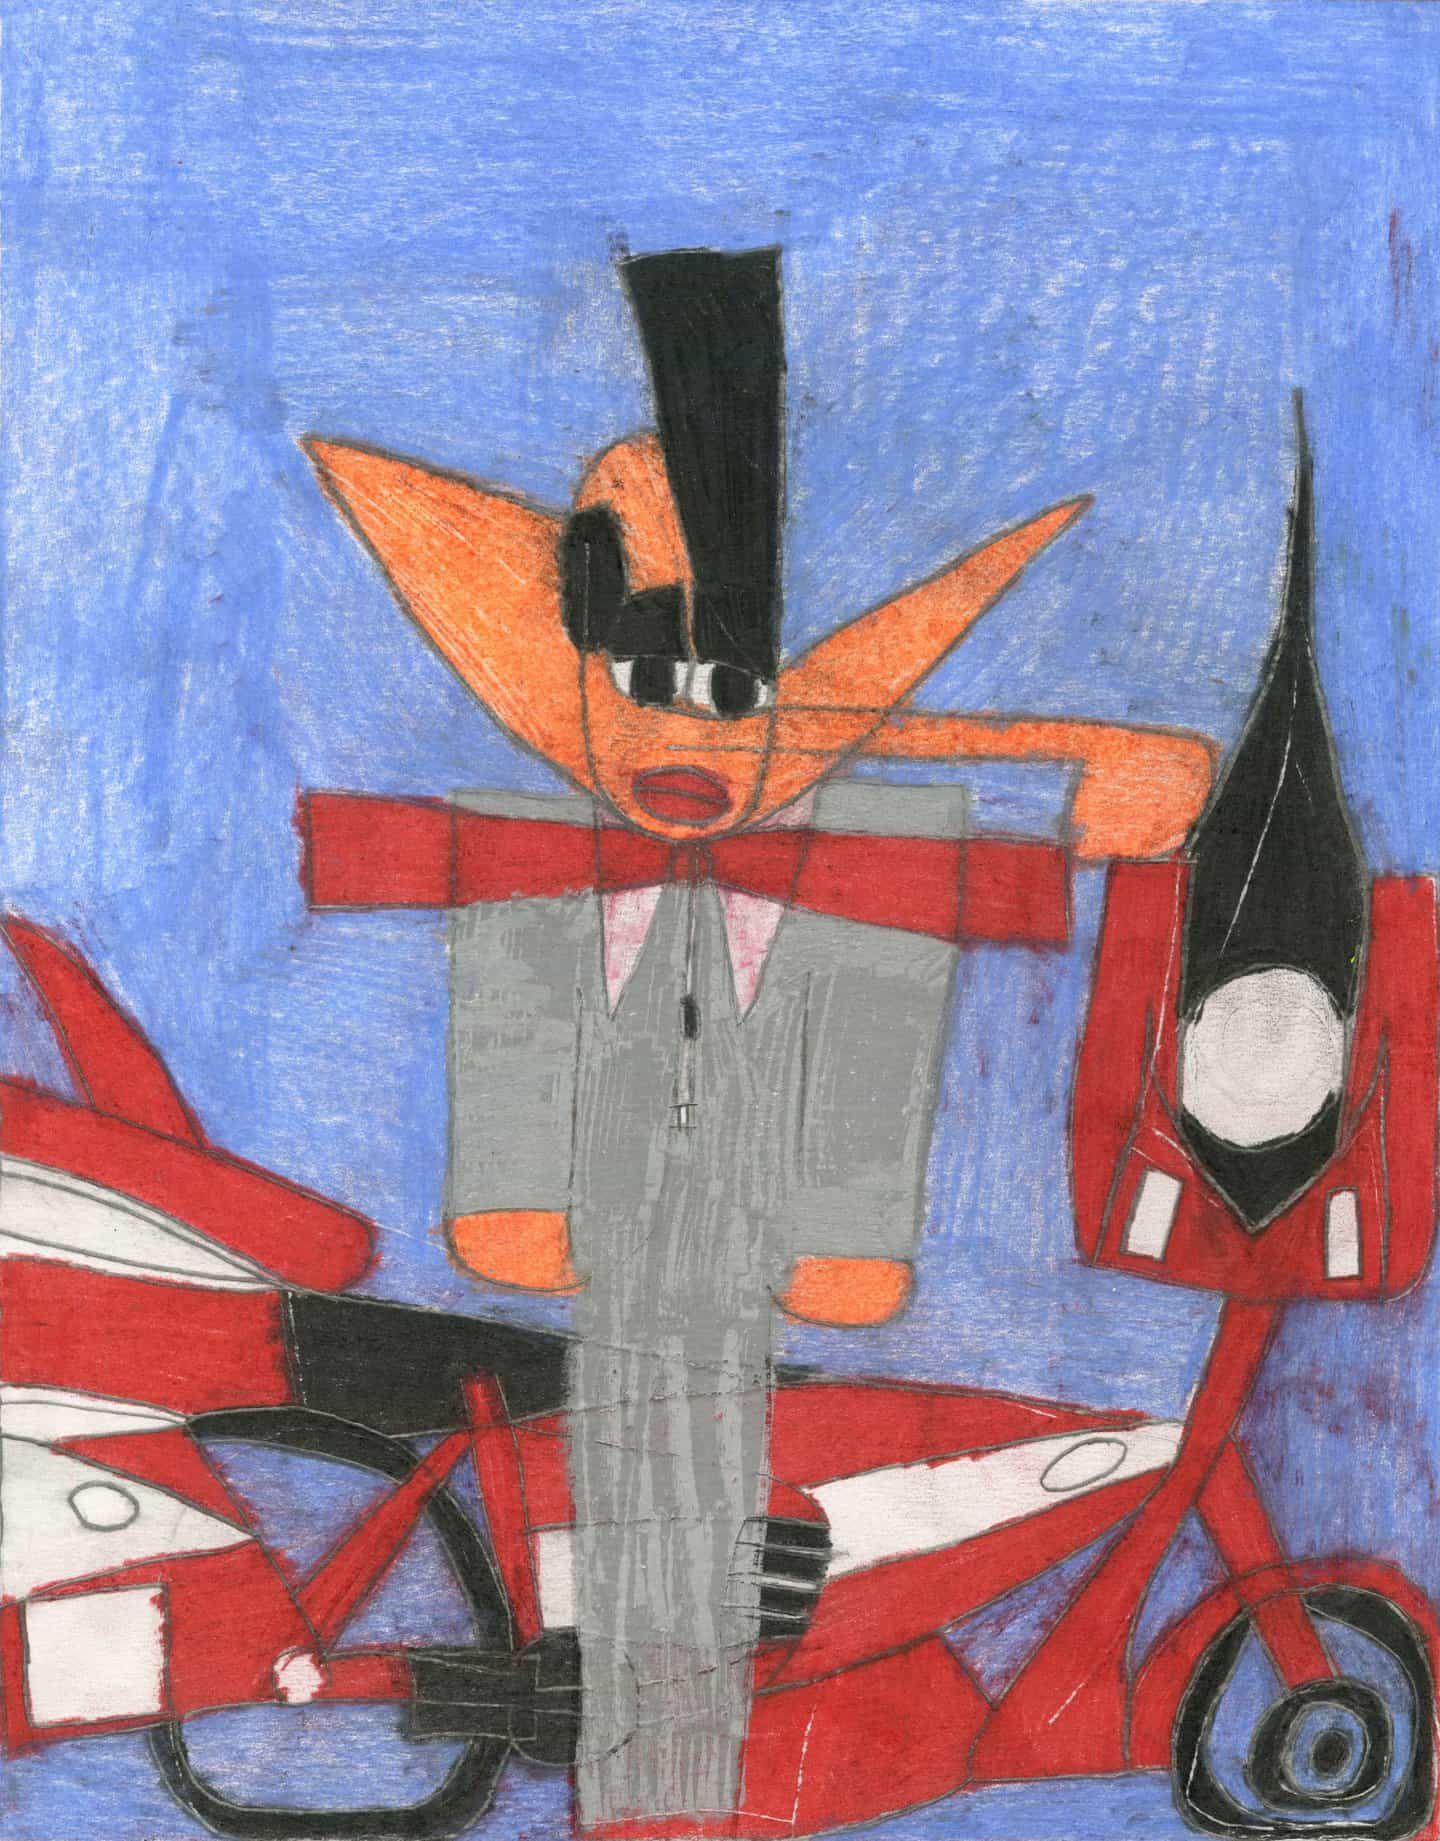 Anthony Coleman: Pee Wee Herman & His Bike (Copyright © Anthony Coleman, 2021)